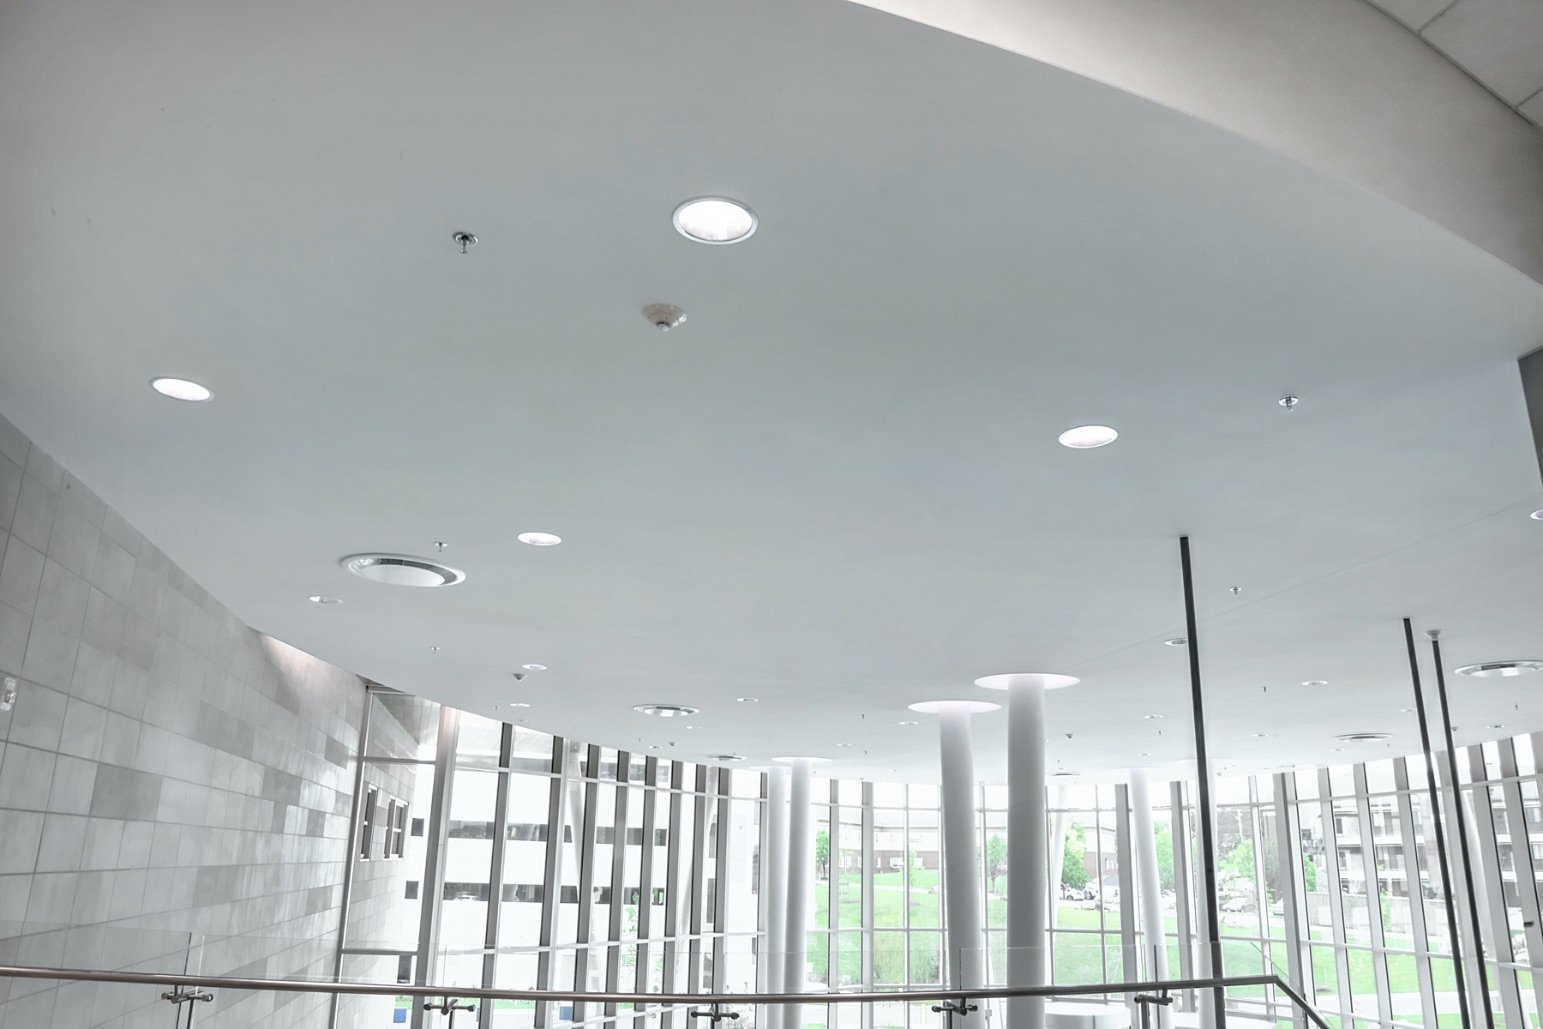 Bradleigh Applications, Inc. Acoustical Plaster Construction using BASWAphon at Catonsville Courthouse